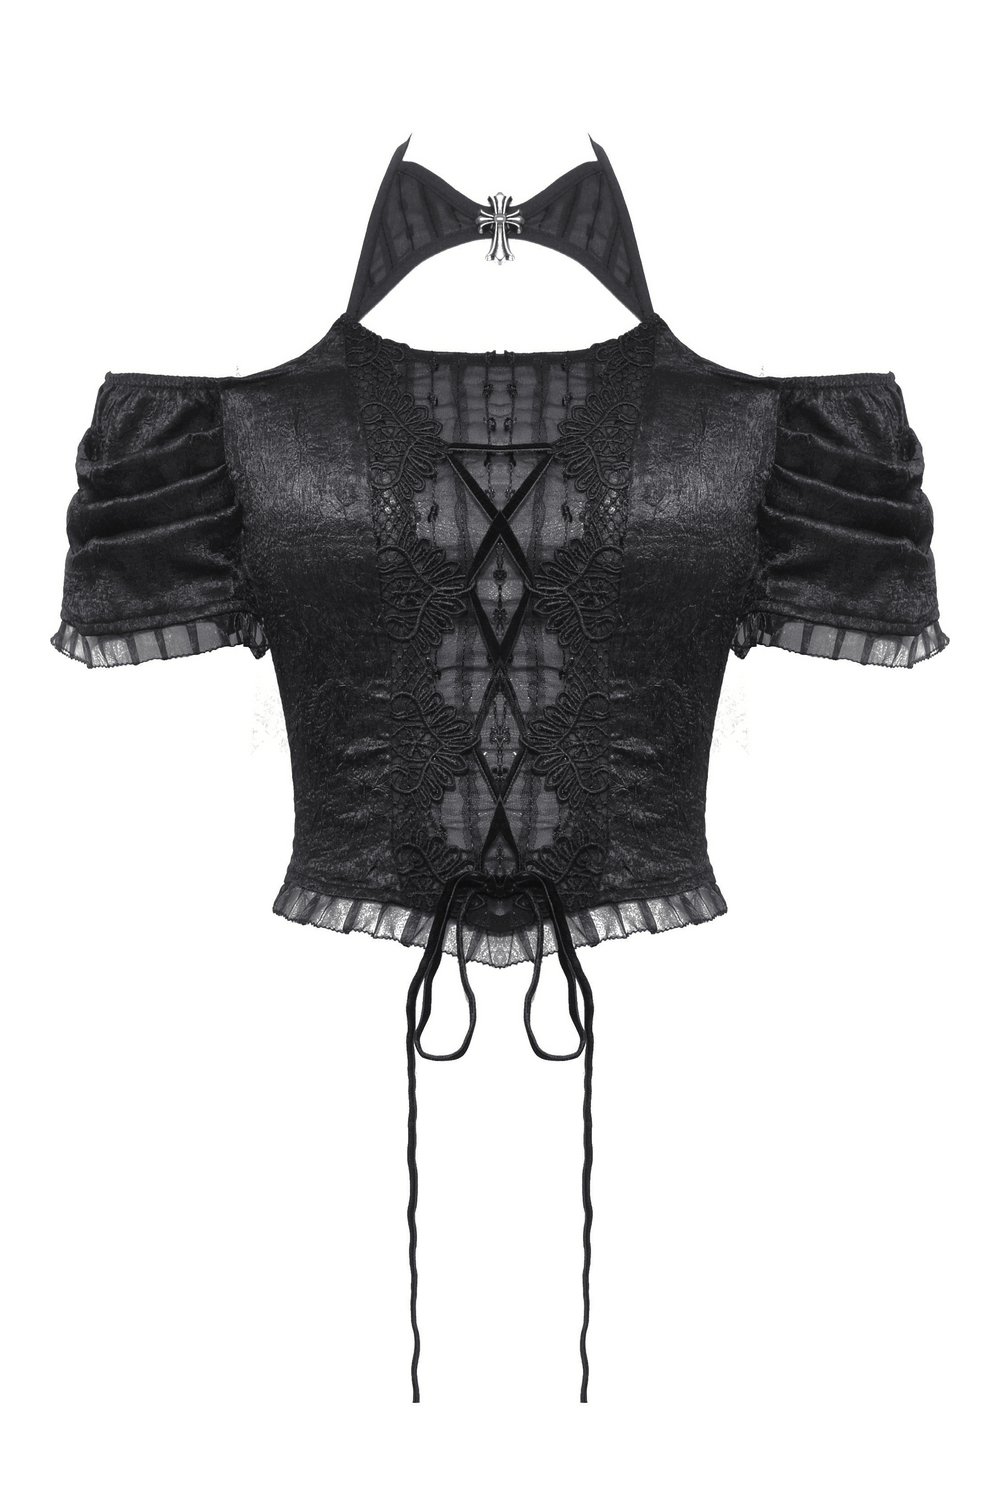 Chic Gothic Black Off-the-Shoulder Top with Lace-Up